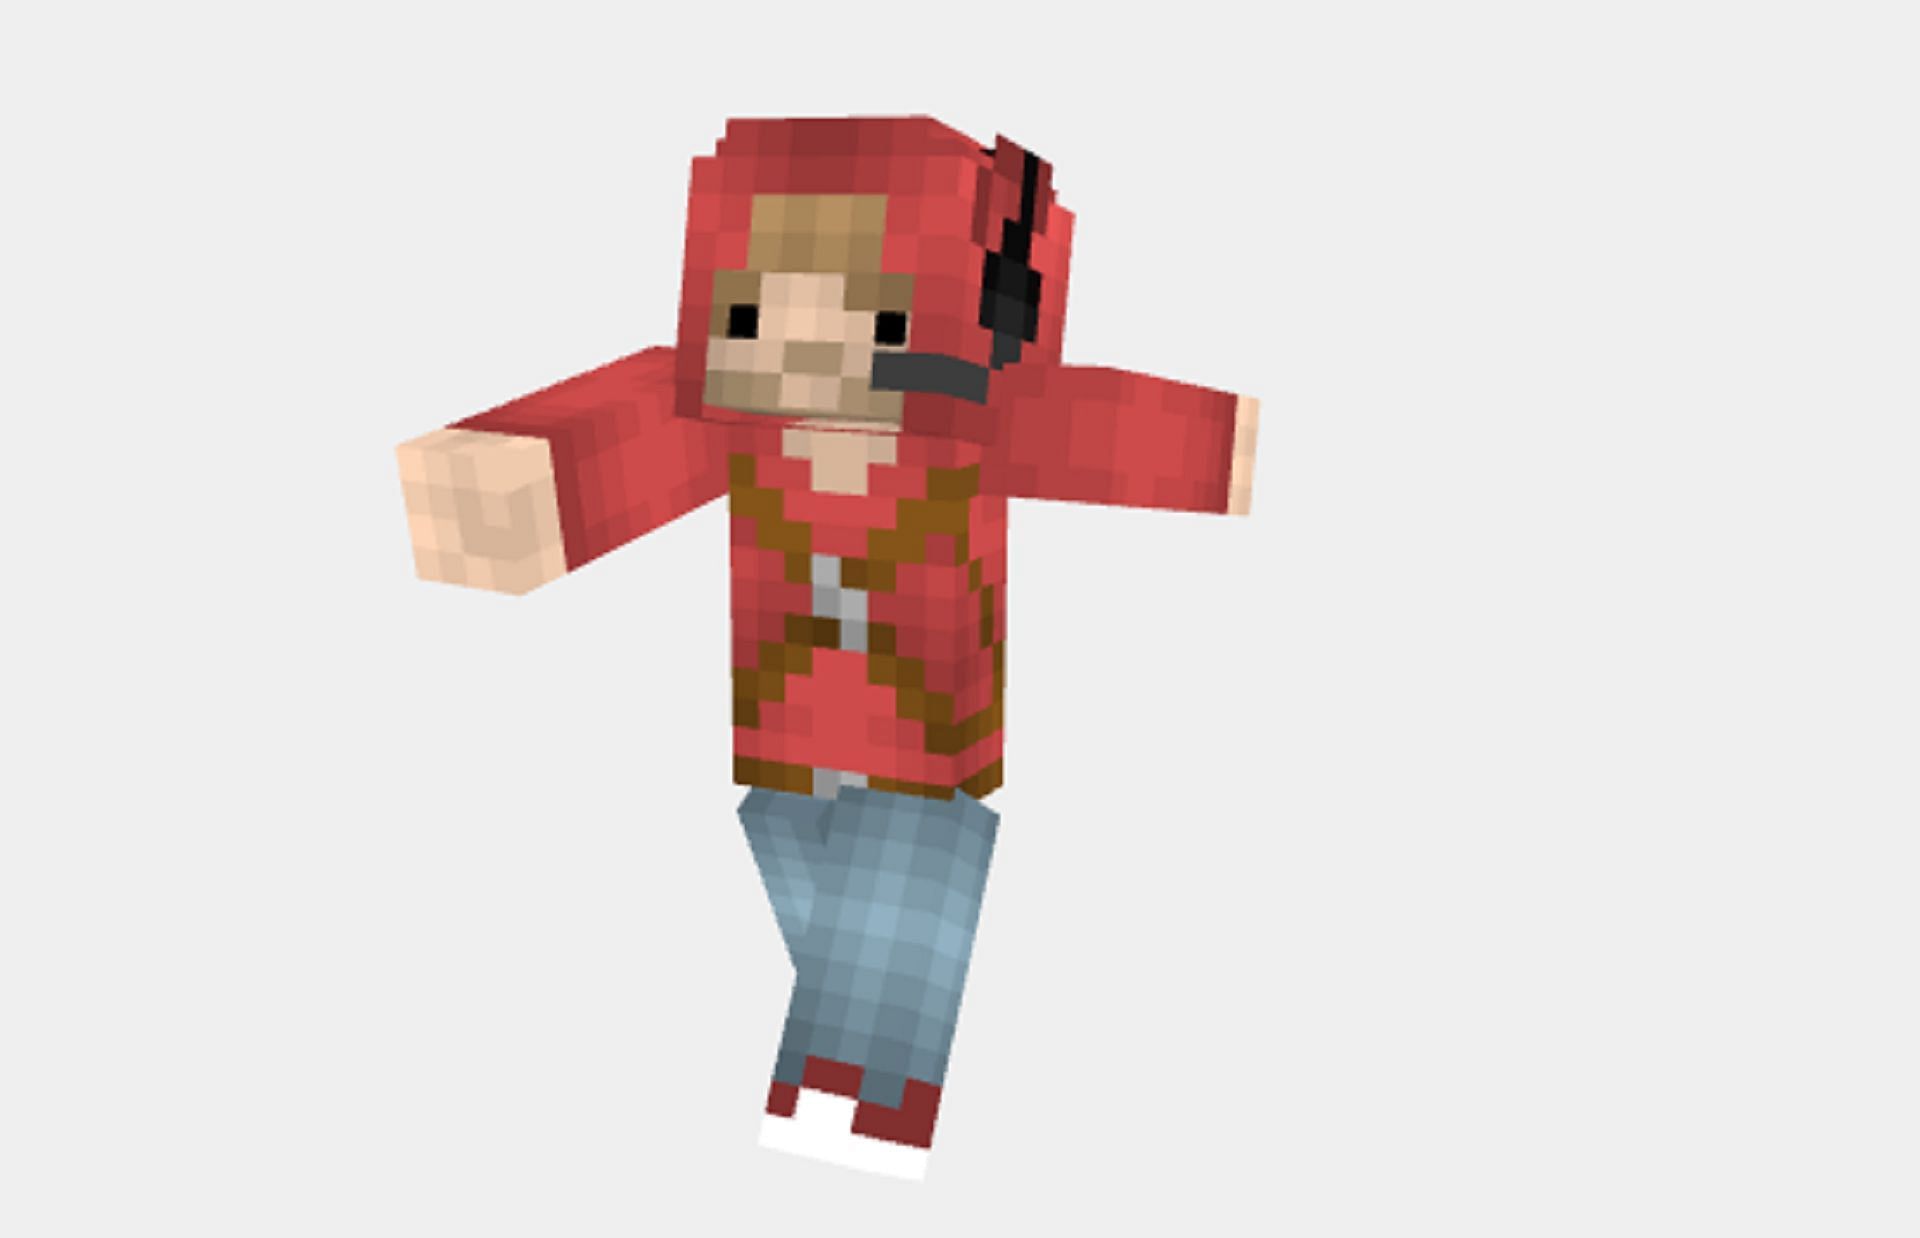 This skin's resemblance to PewDiePie is unmistakable (Image via TinyKender/MinecraftSkins.net)